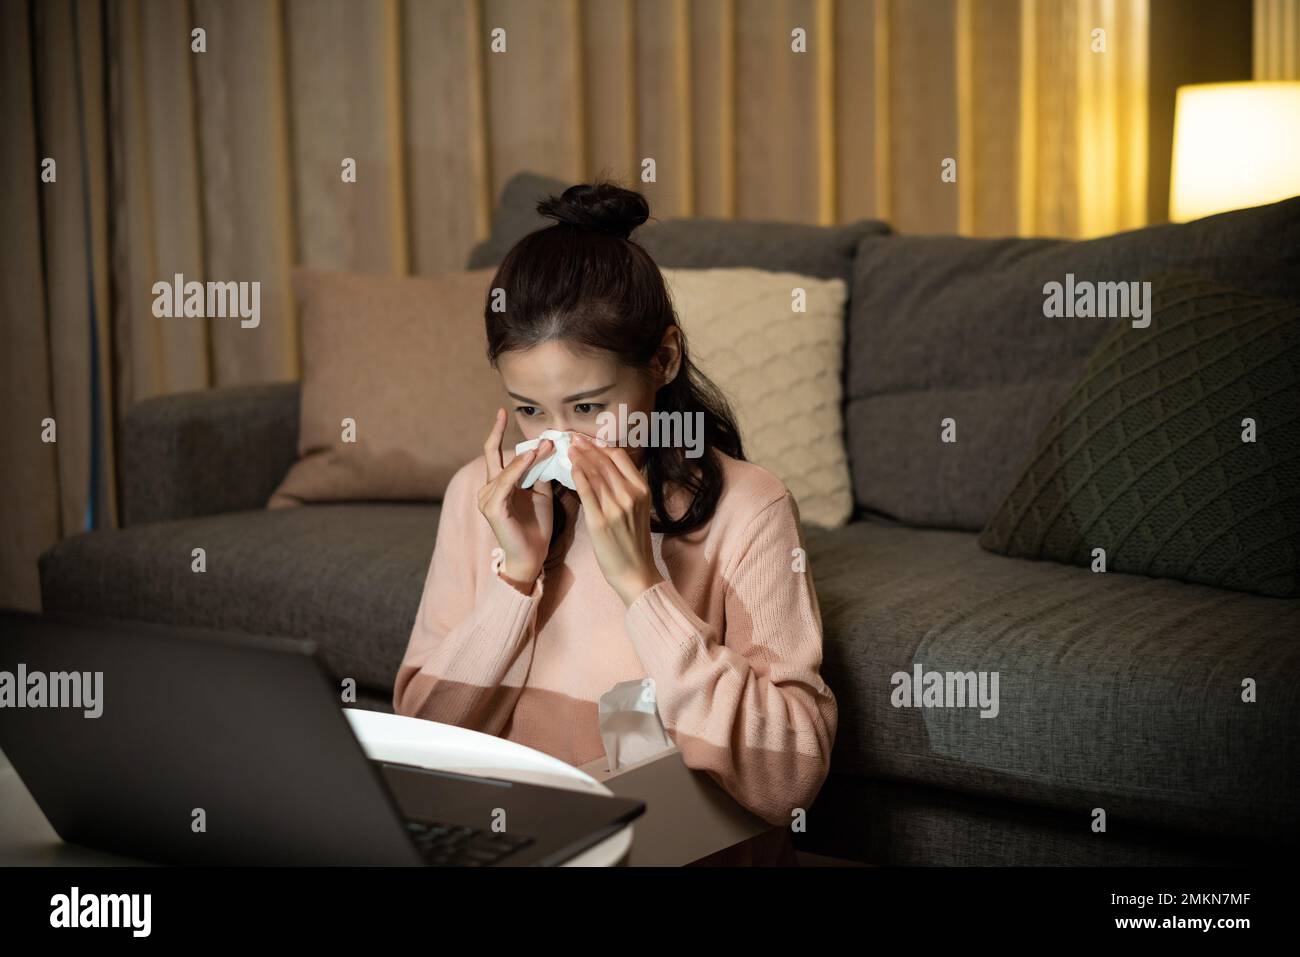 The young lady eat at home use the computer Stock Photo